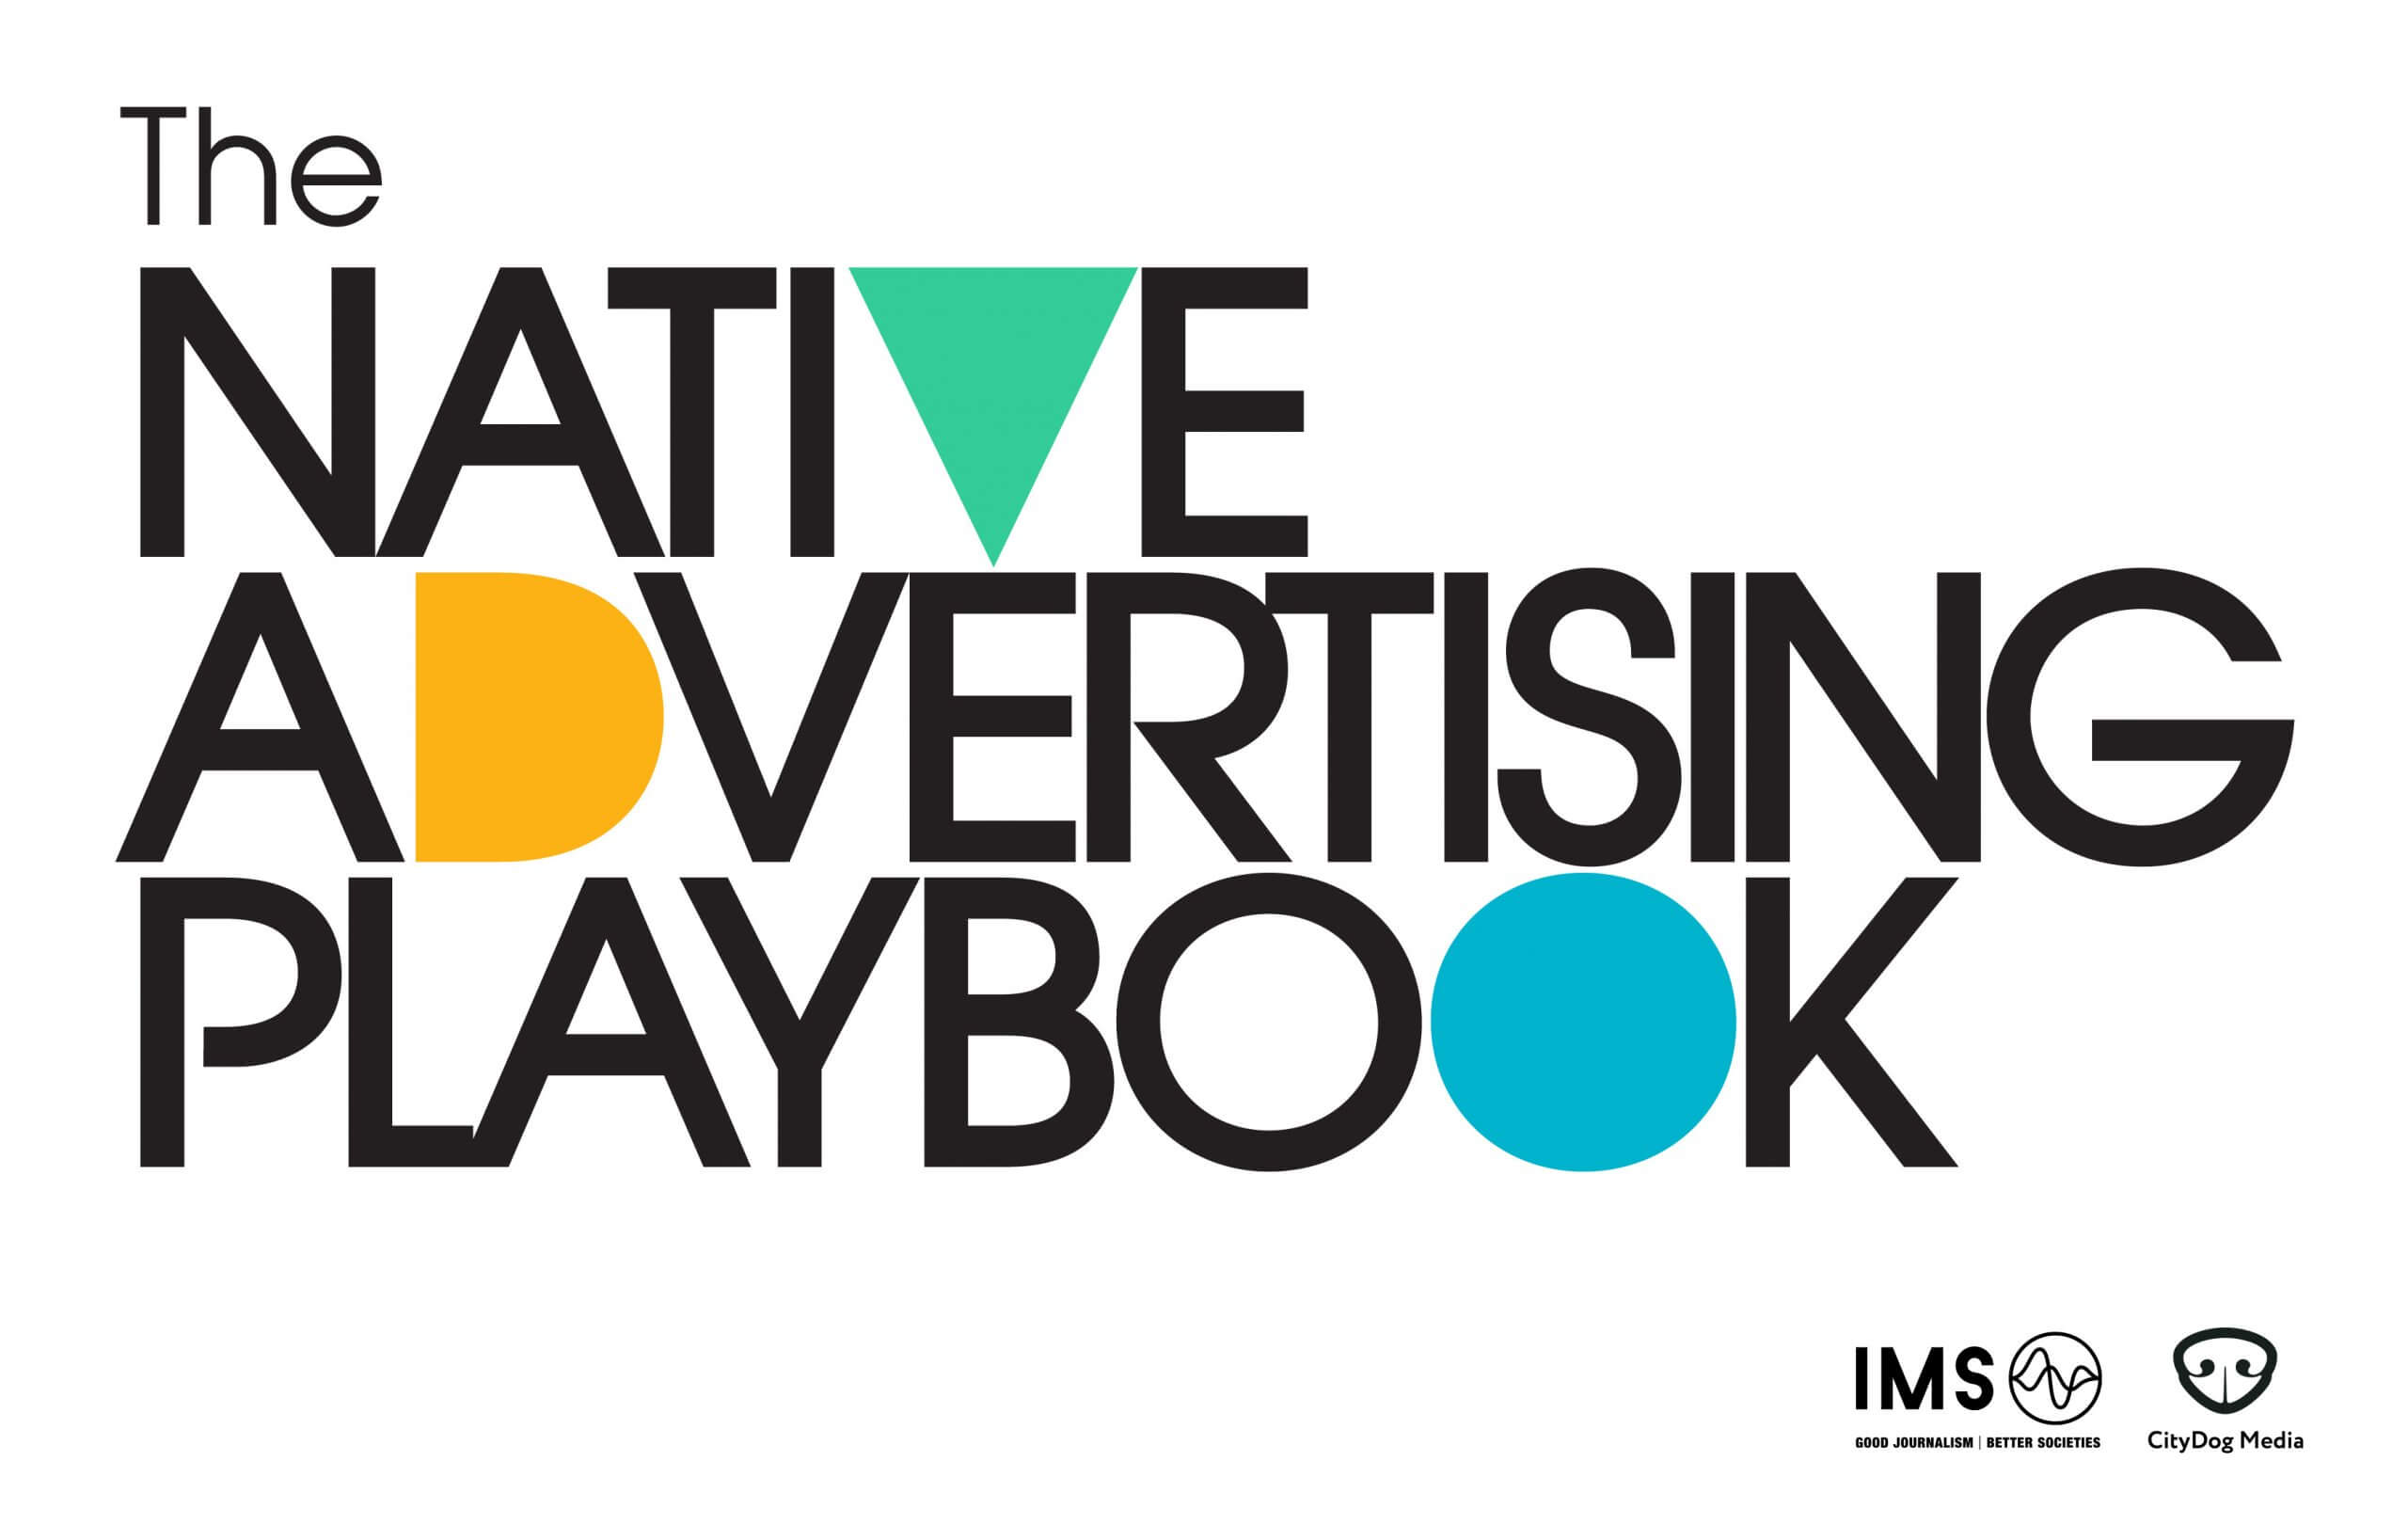 The Native Advertising Playbook